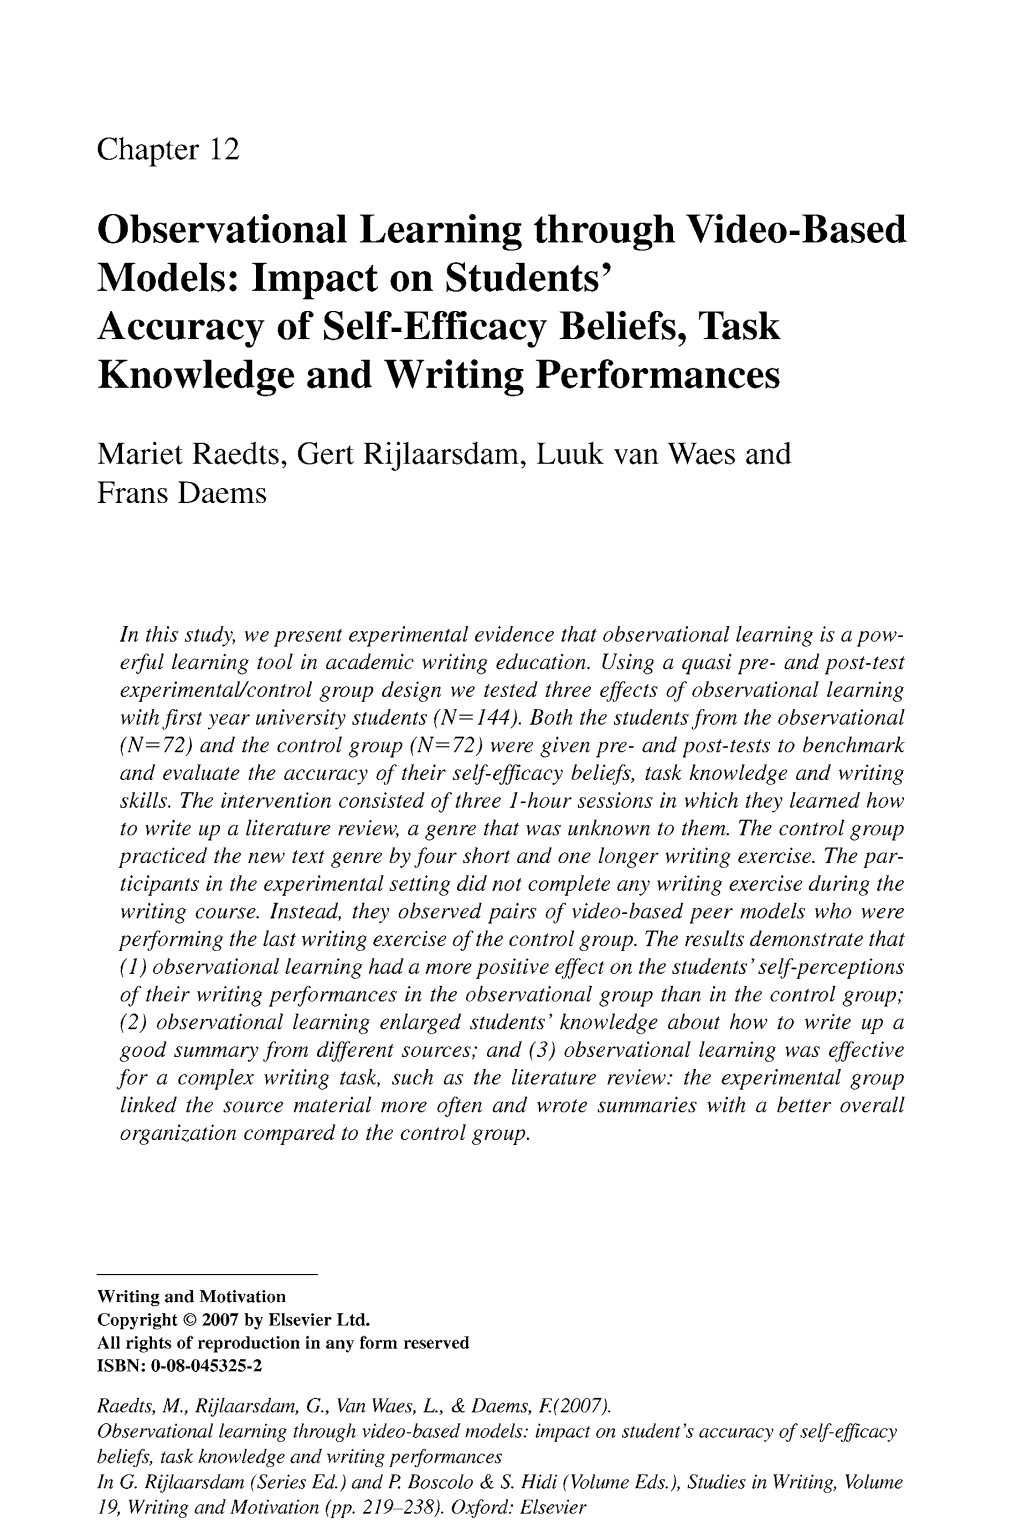 Observational Learning Through Video-Based Models: Impact on Students' Accuracy of Self-Efficacy Beliefs, Task Knowledge and Writing Performances